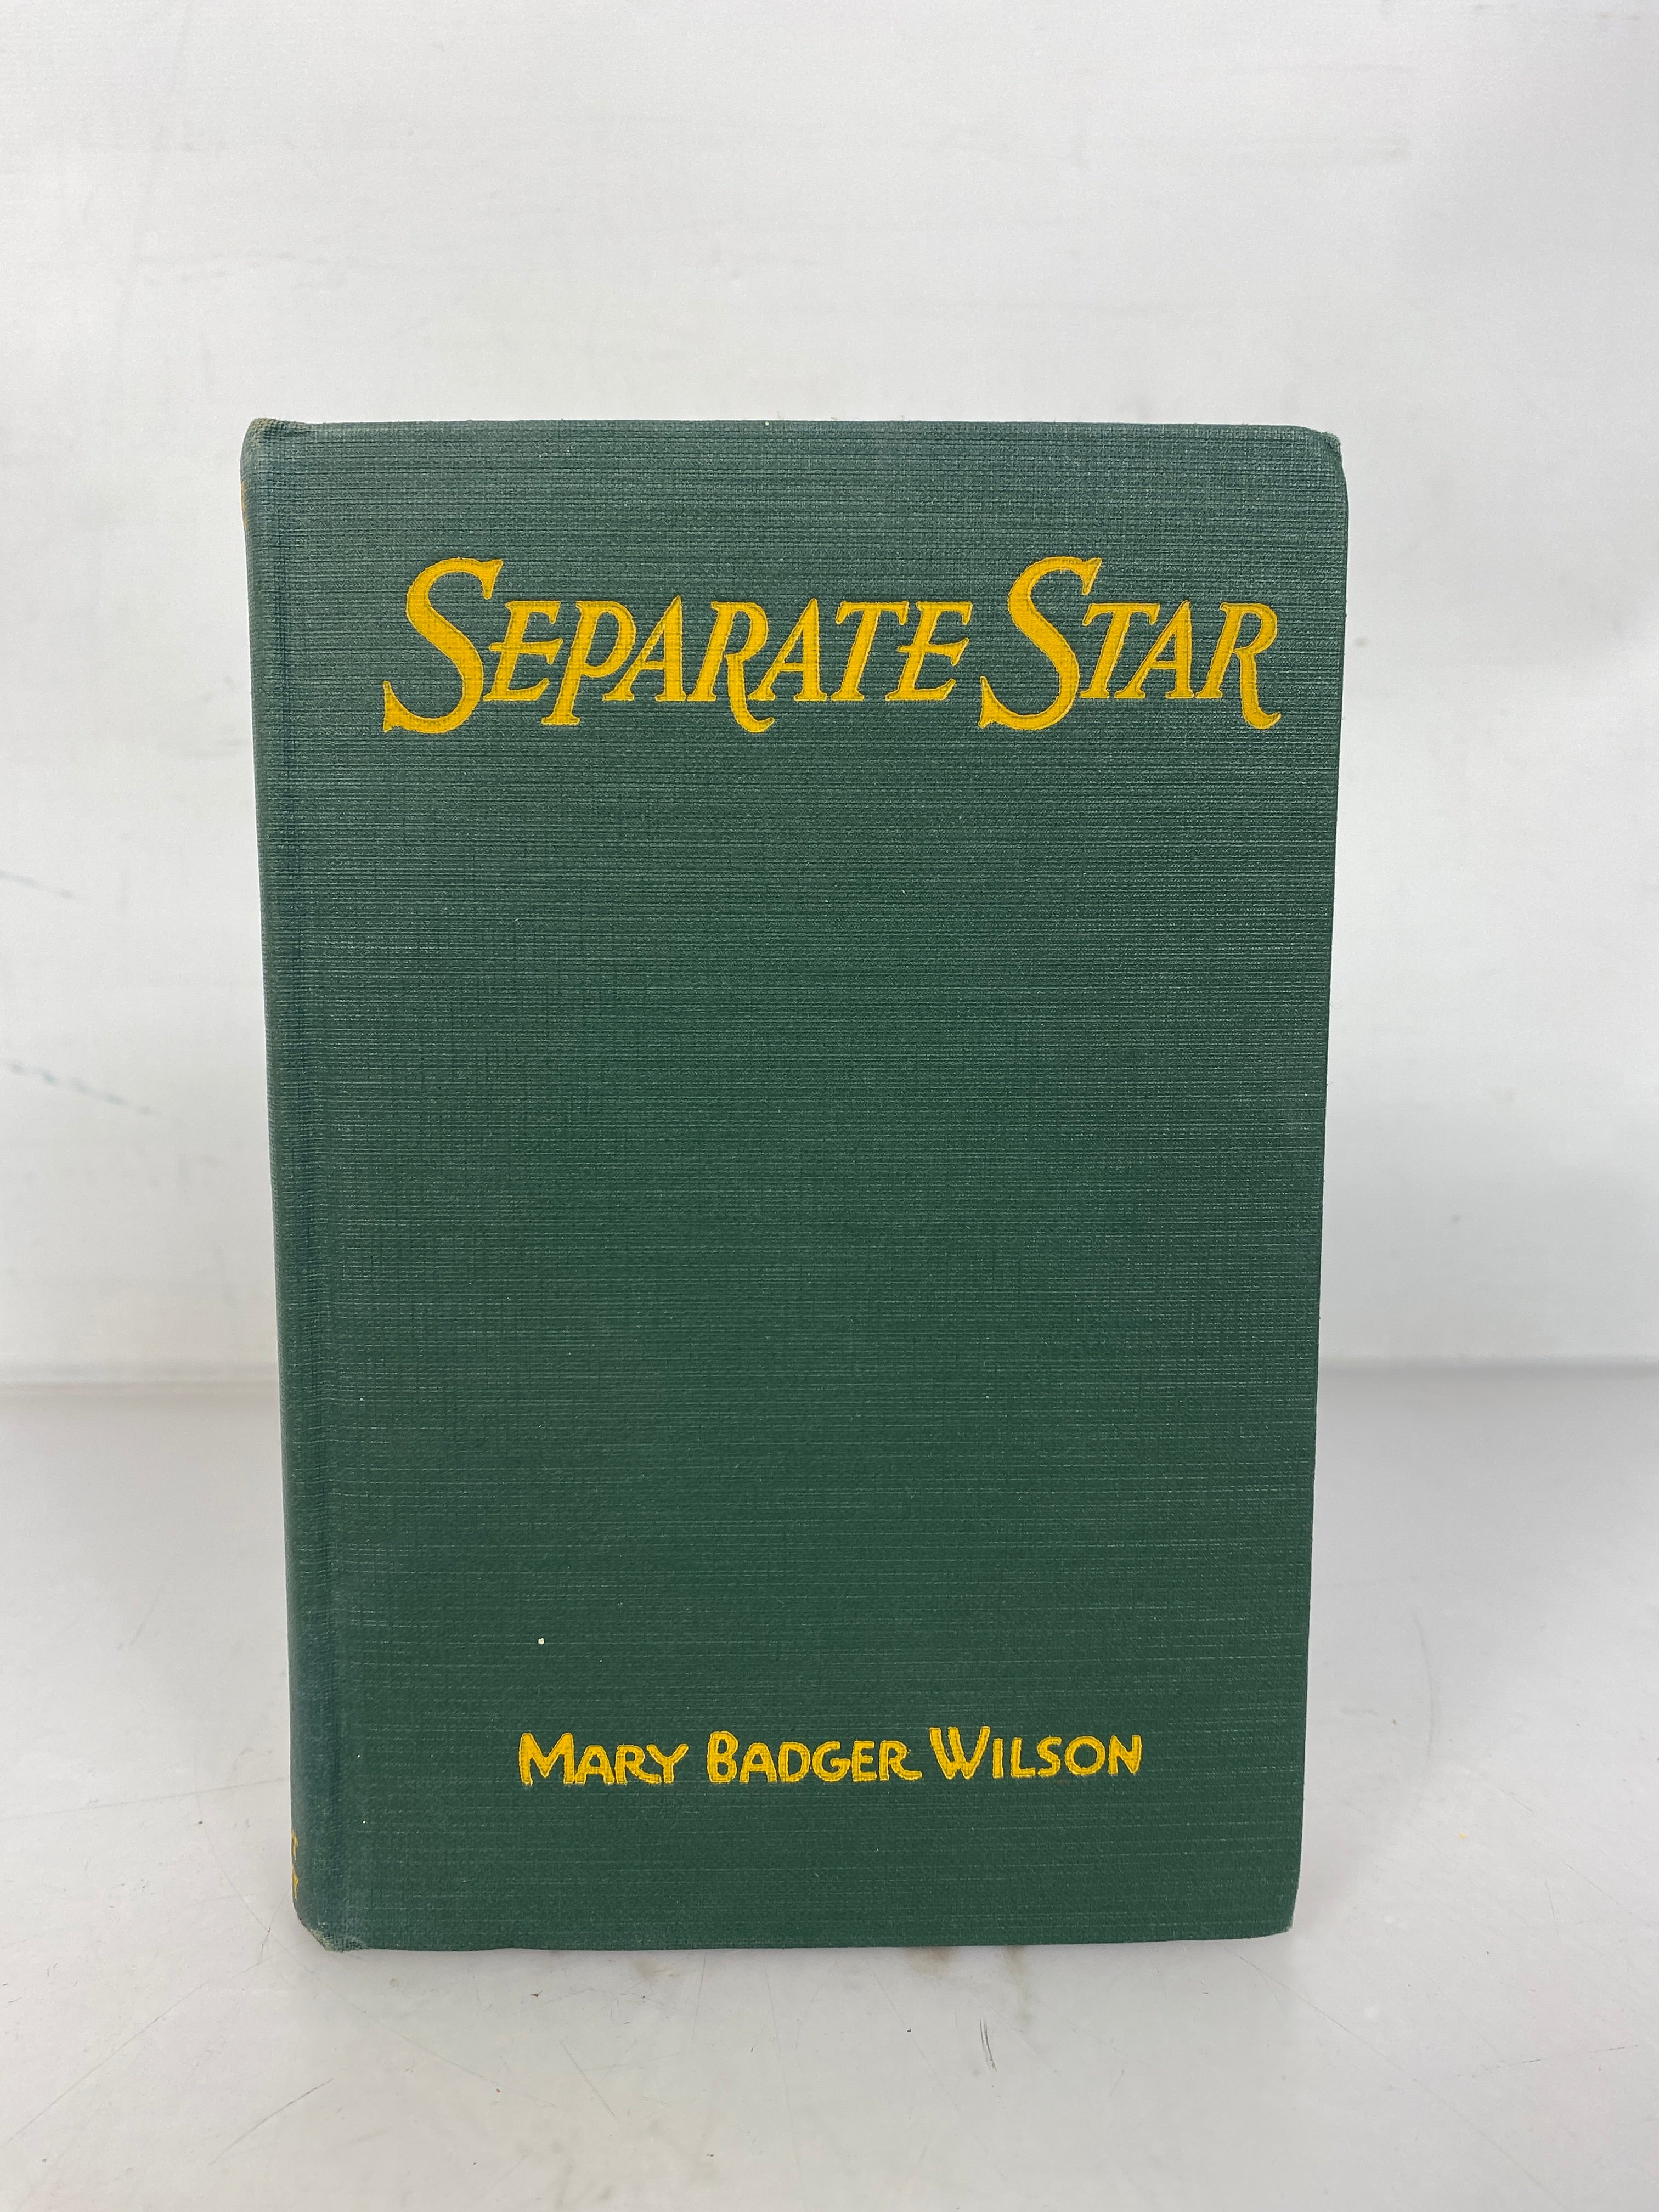 Rare Vintage Romance Separate Star by Mary Badger Wilson 1932 HC